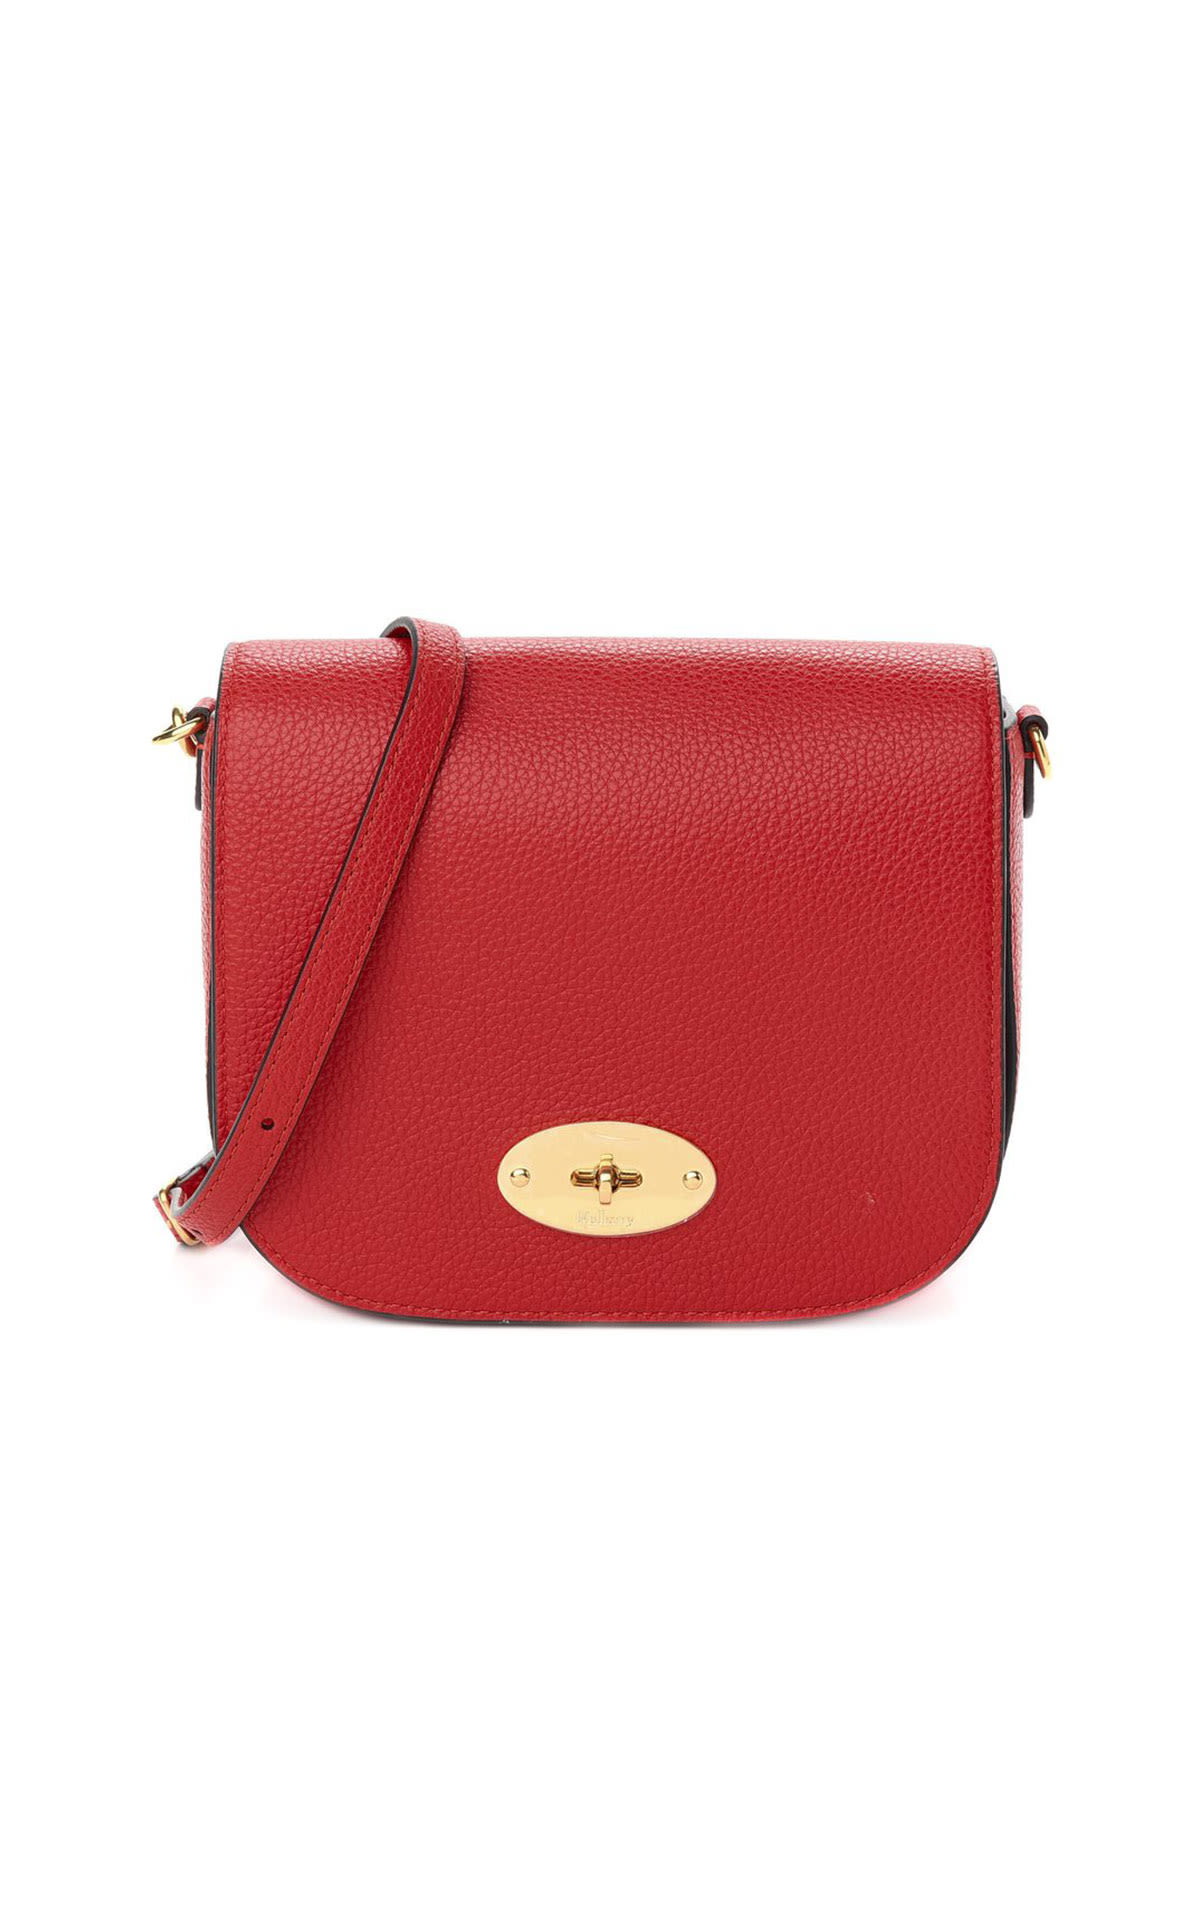 Mulberry Darly satchel from Bicester Village